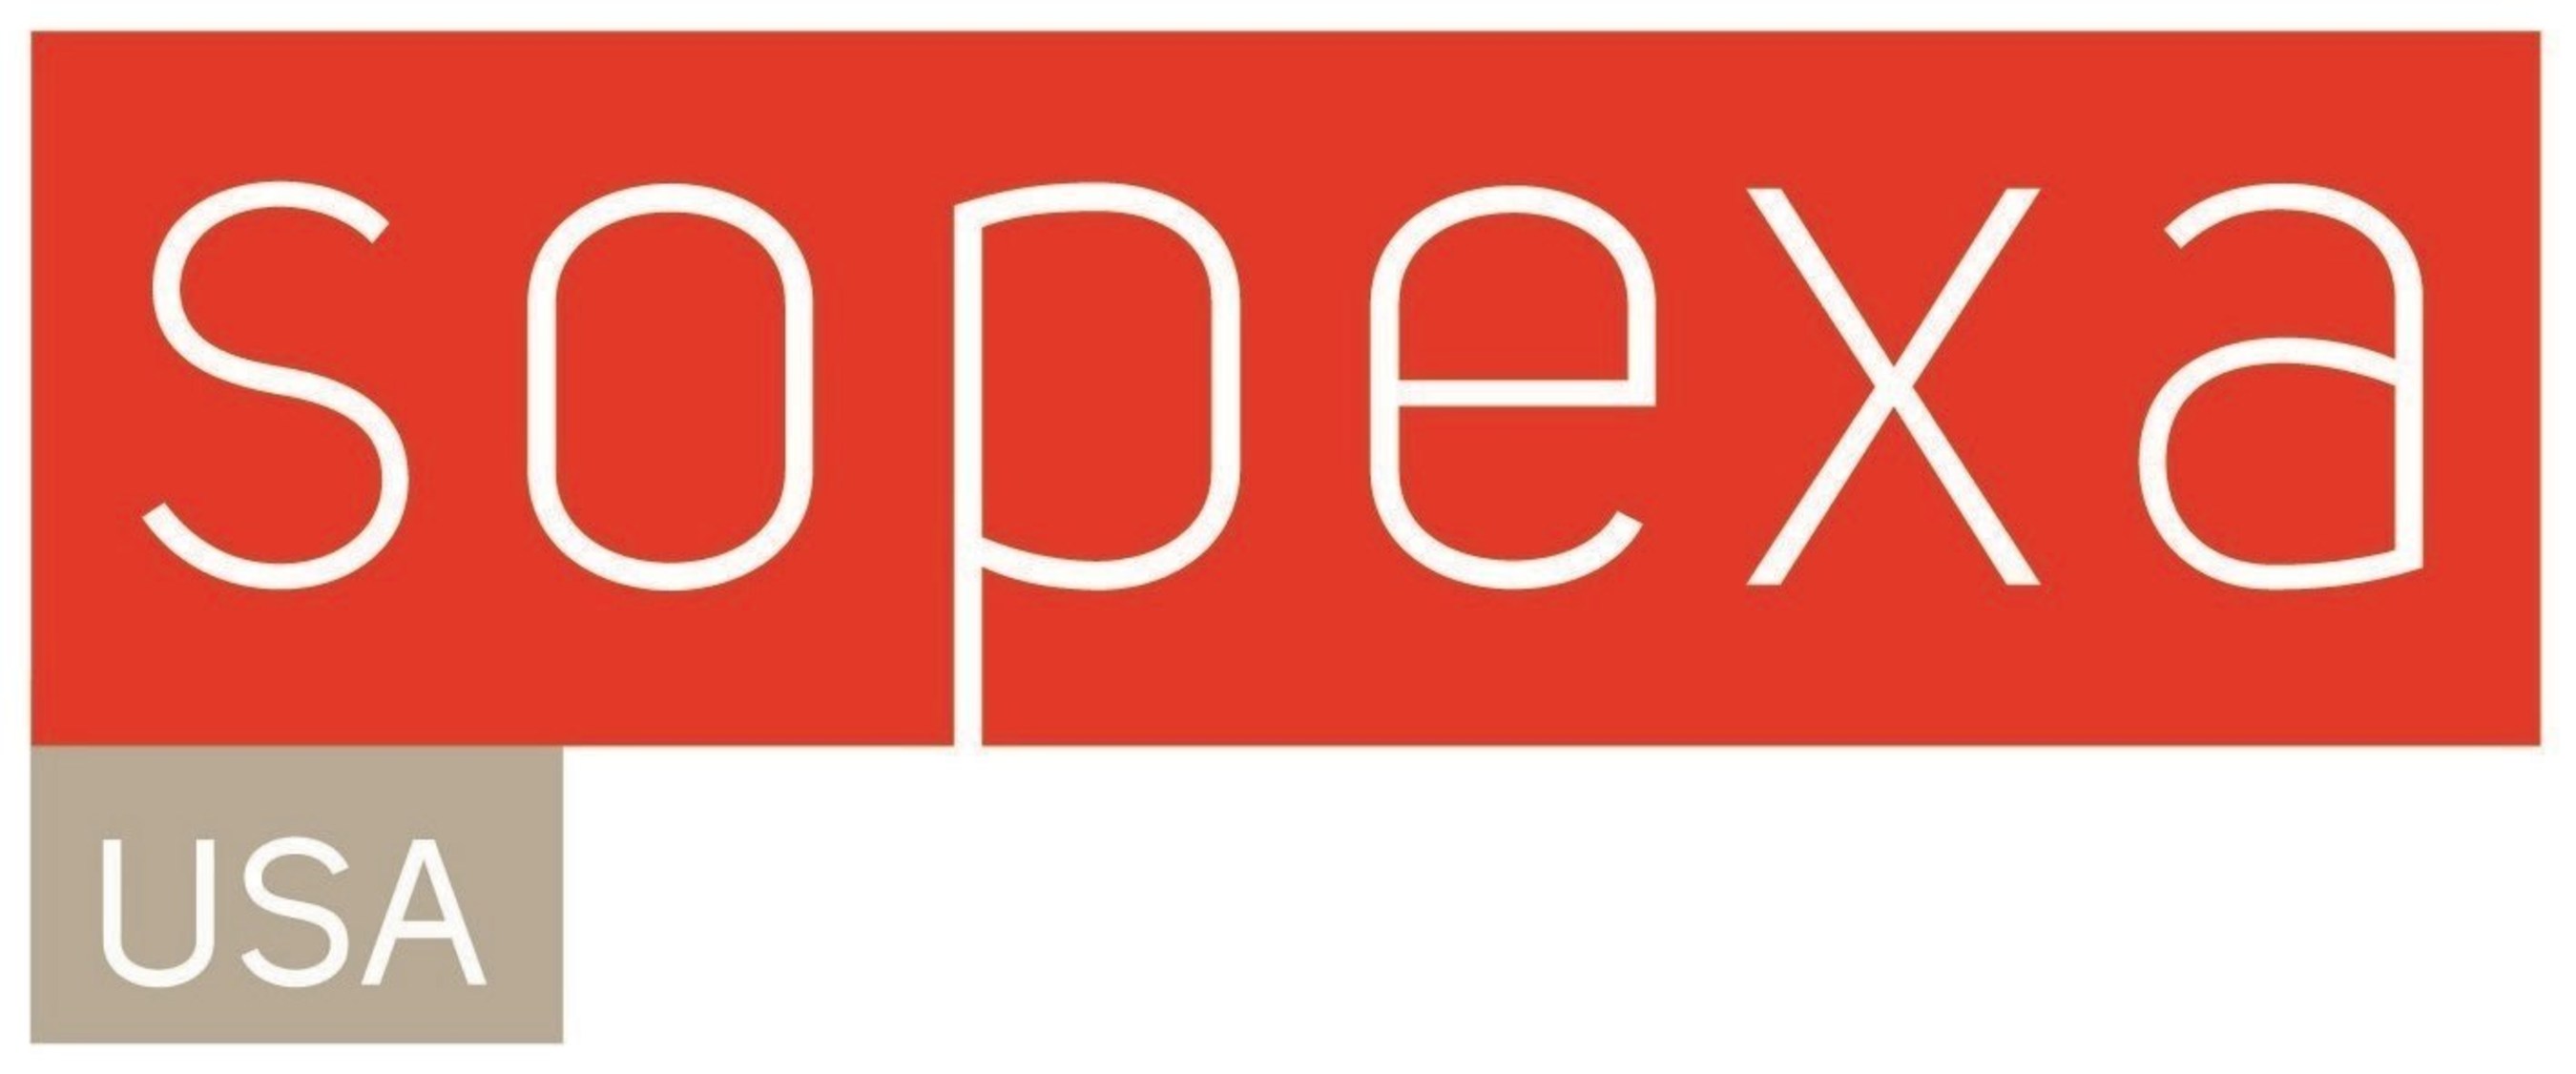 Sopexa USA - International communication and marketing agency specializing in food, beverage and lifestyle.